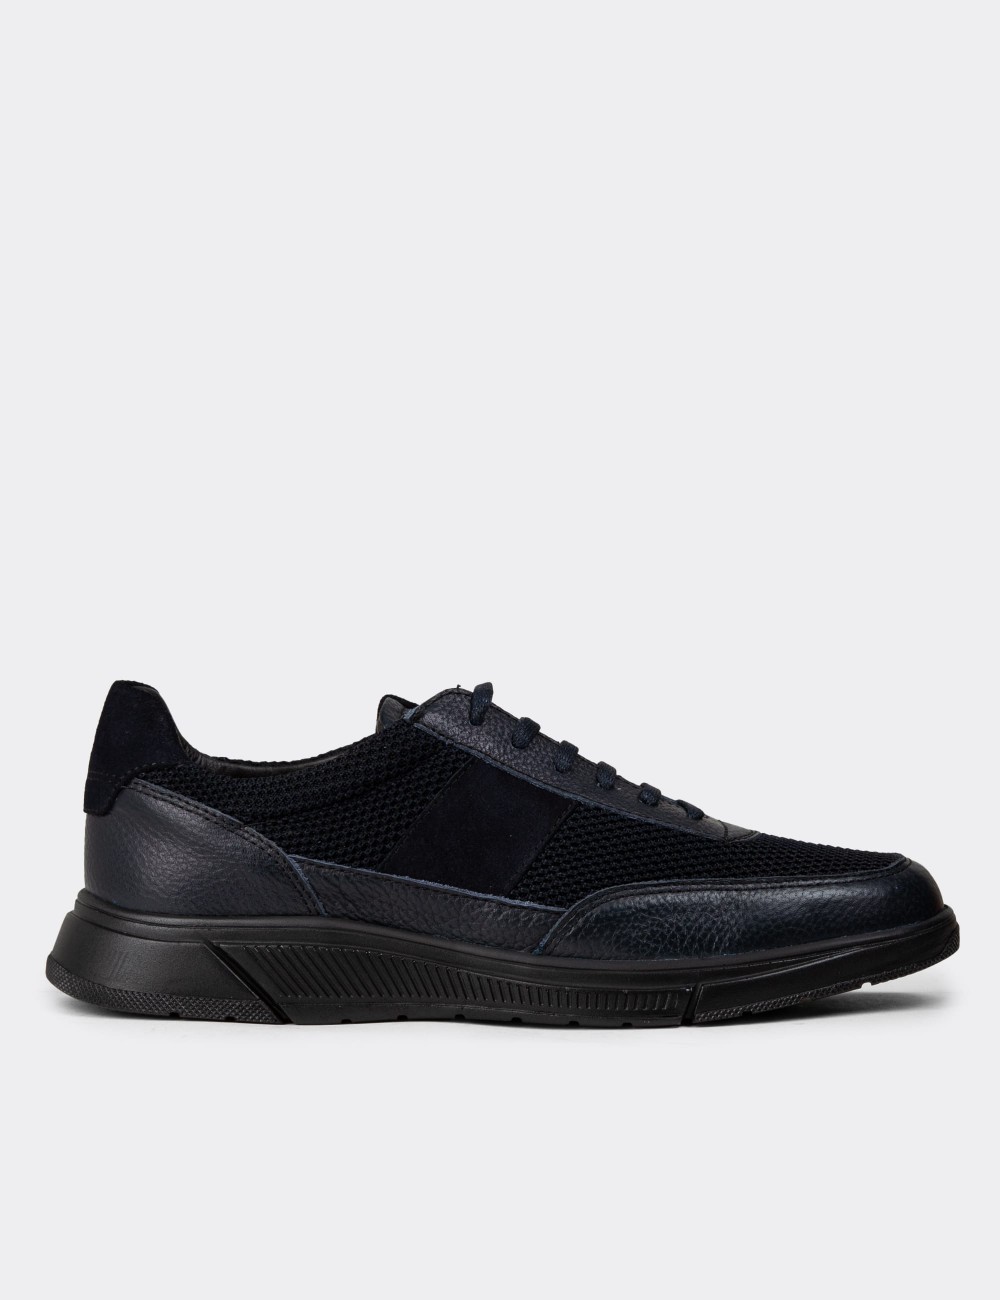 Navy Leather Sneakers - 01963MLCVE05